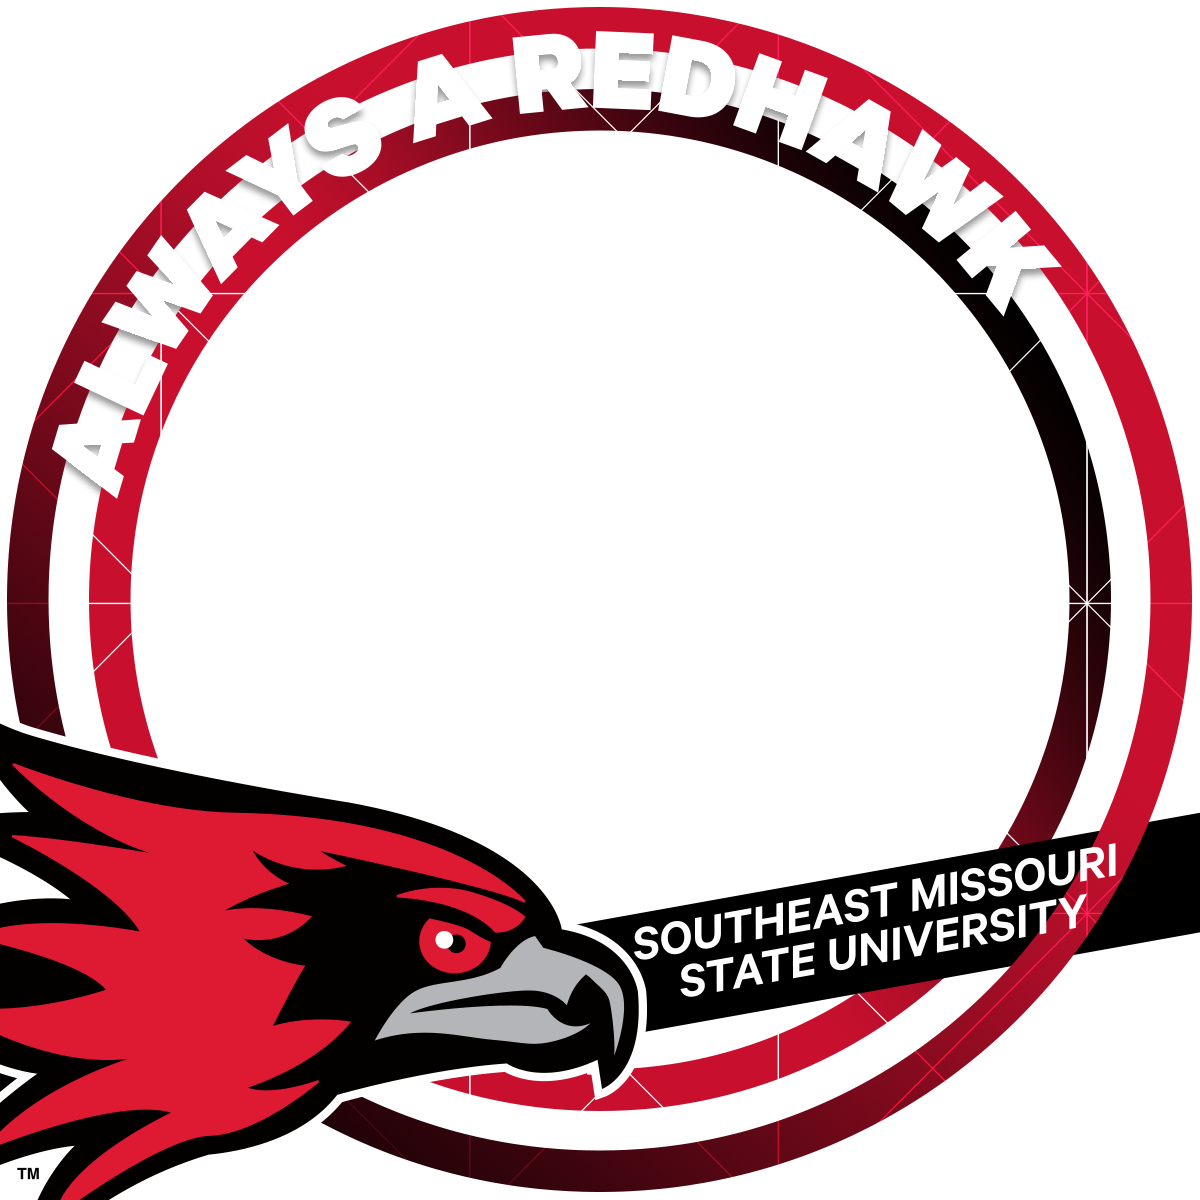 "Always a redhawk" circle frame with redhawk logo in bottom left corner and "Southeast Missouri State University" in the bottom right